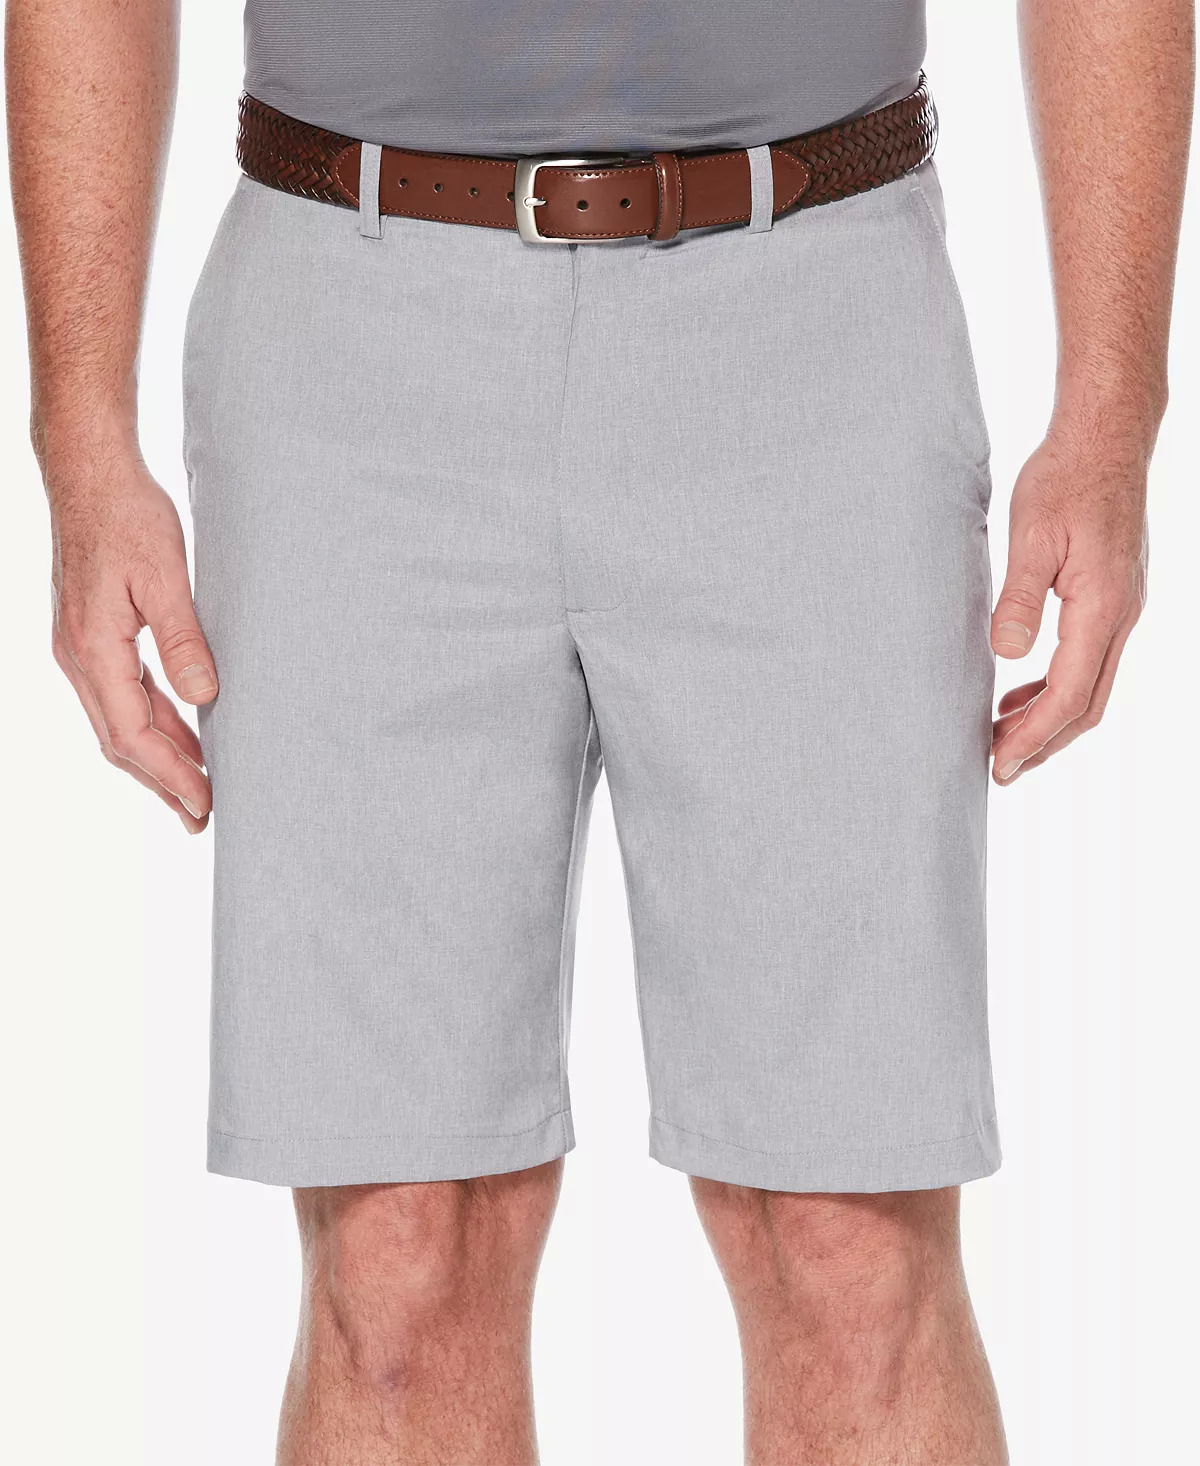 PGA Tour Men's Apparel: Flat Front Golf Shorts (2 Colors) $16.16, Flat-Front Golf Pants (Silver Lining) $19.96 & More + Free Store Pickup at Macy's or FS on $25+